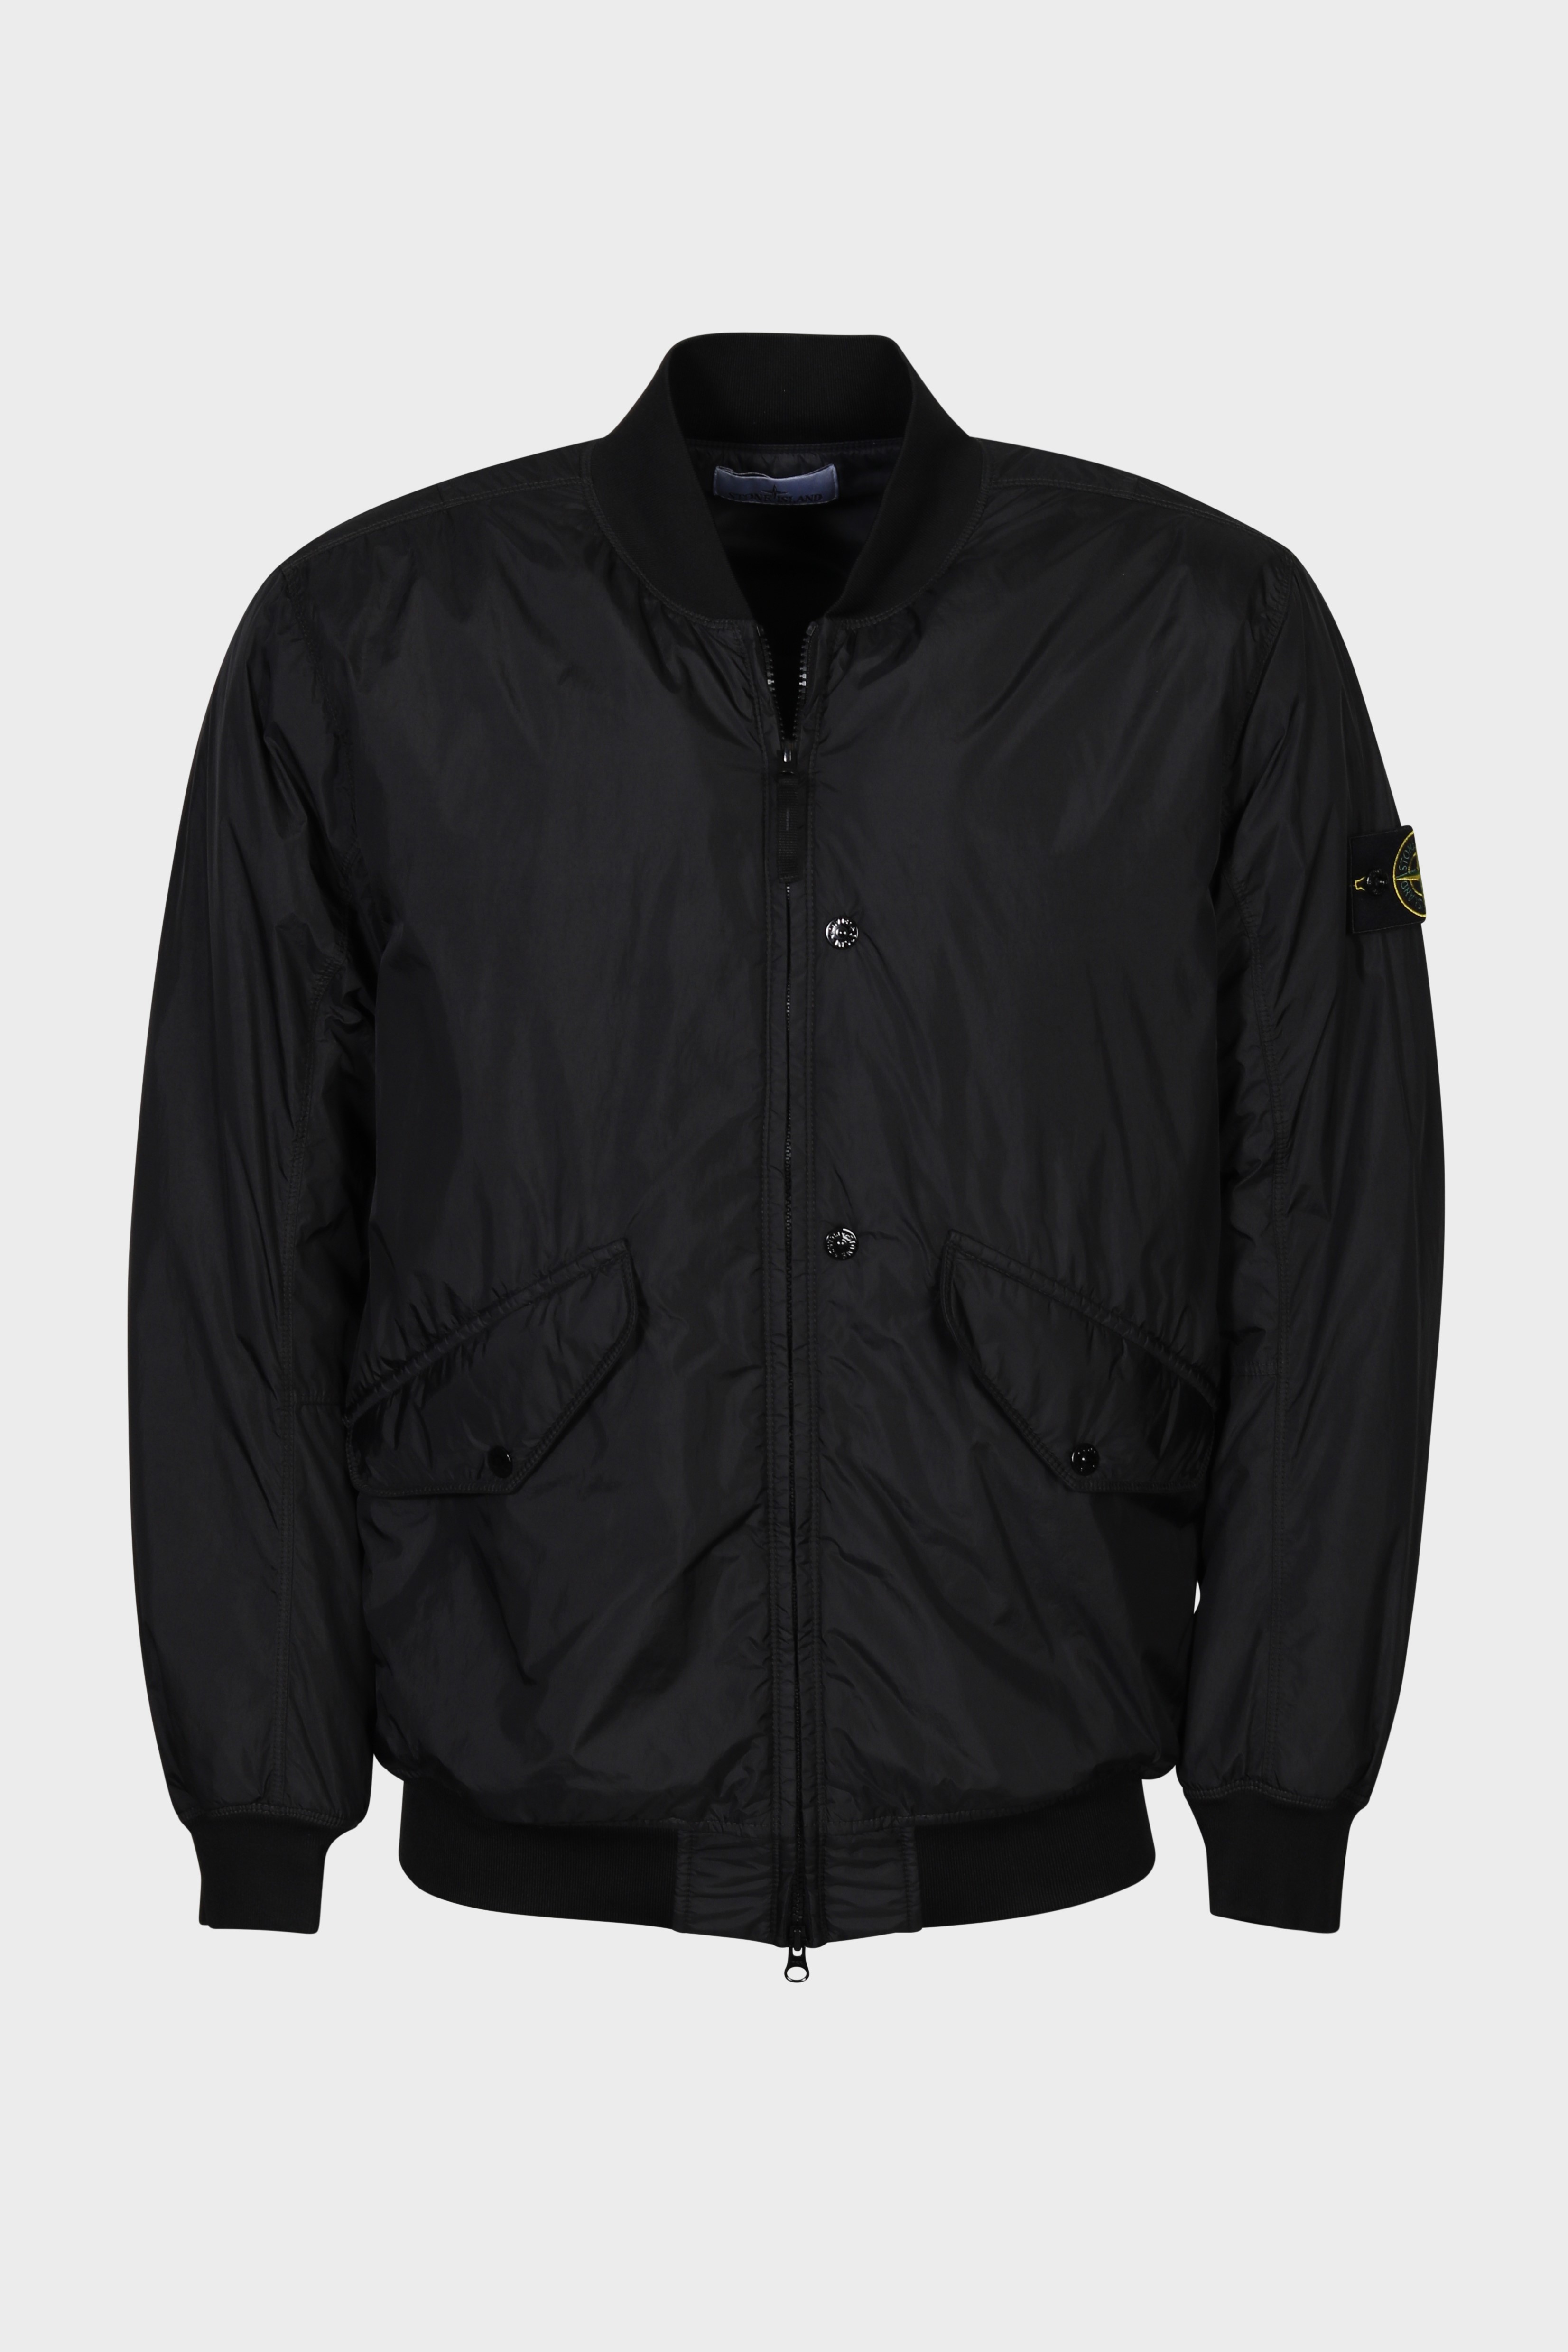 STONE ISLAND Garment Dyed Crinkle Reps Bomber Jacket in Black